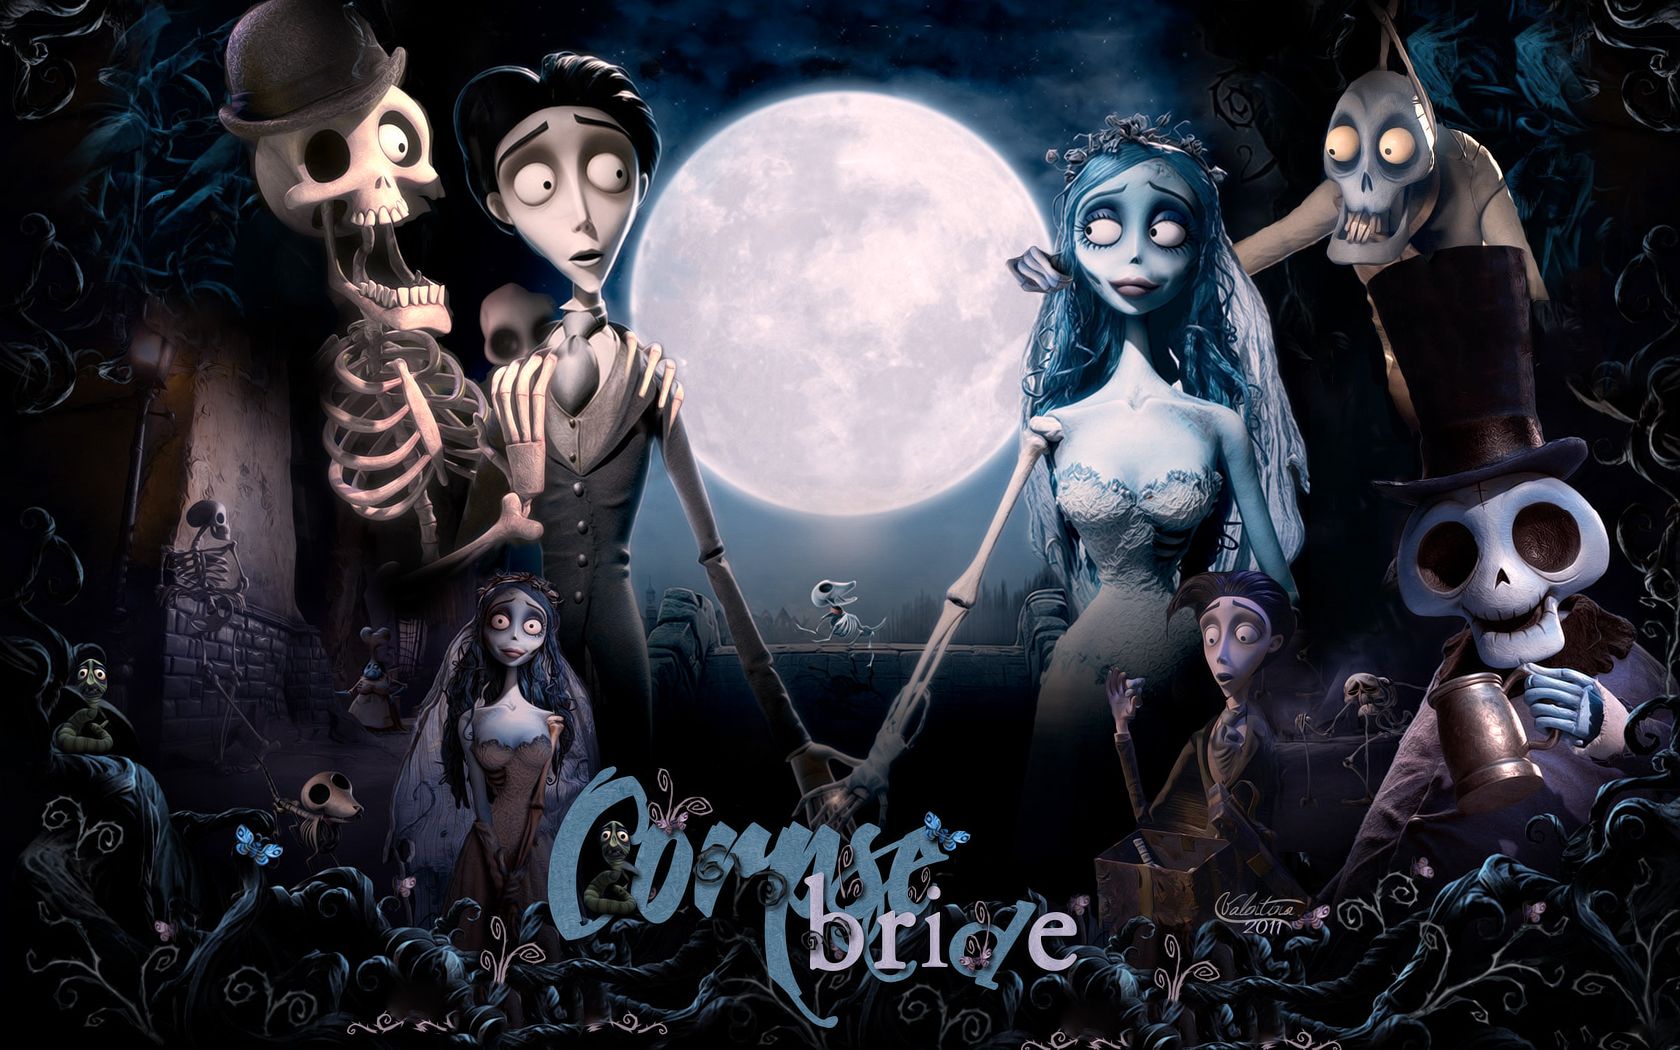 Corpse Background. Corpse Party 3DS Wallpaper, Corpse Party Wallpaper and Corpse Bride Wallpaper